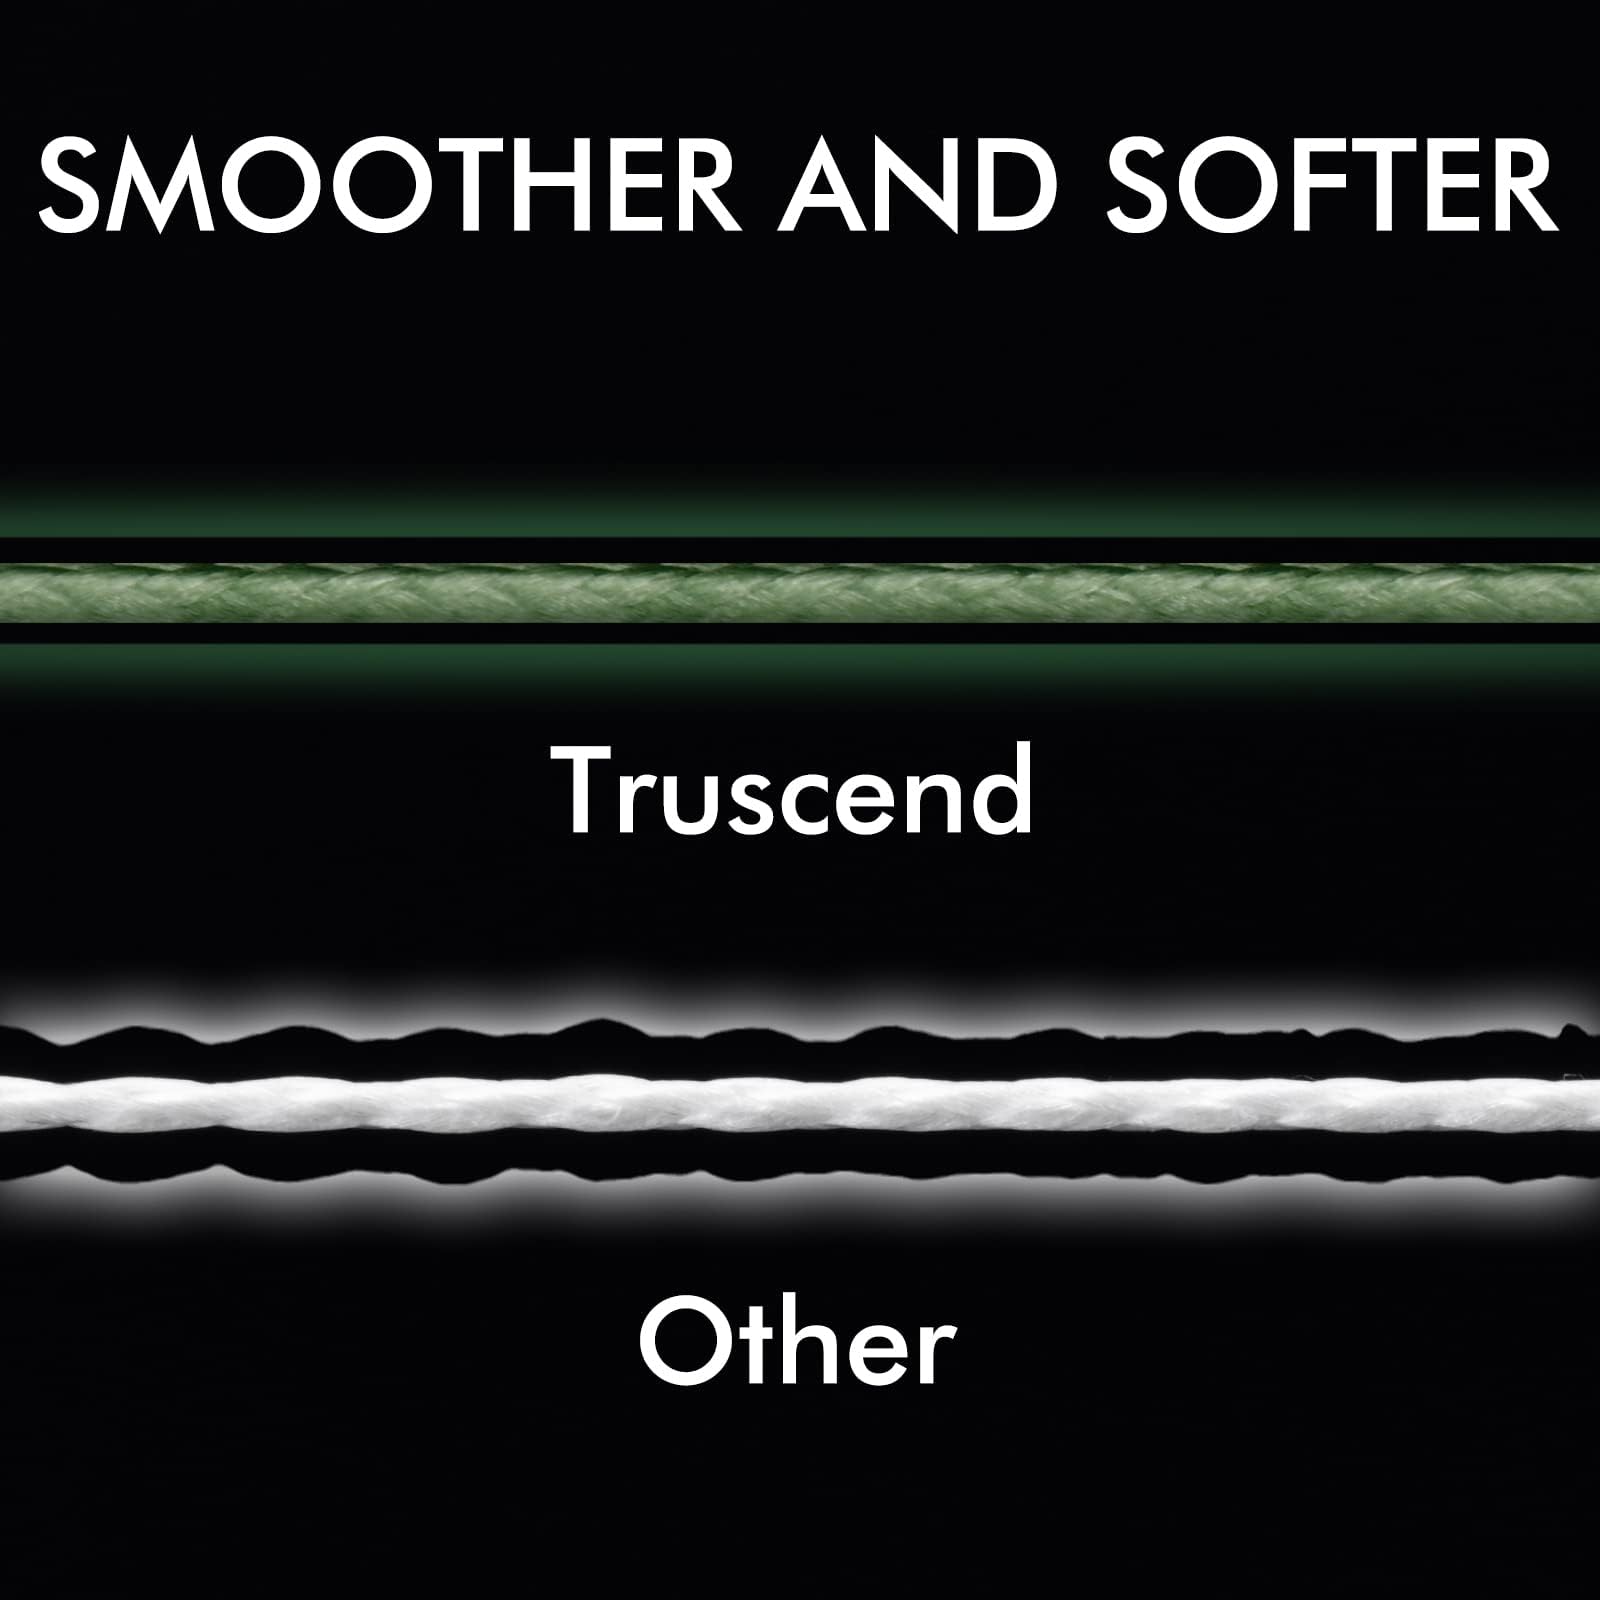 TRUSCEND Braided Fishing Line, Upgraded Spin 8 Strands Fishing Wire, Smooth and Ultra Thin, Super Strength and Abrasion Resistant, No Stretch and Low Memory, A2-20lb/0.16mm/328yds